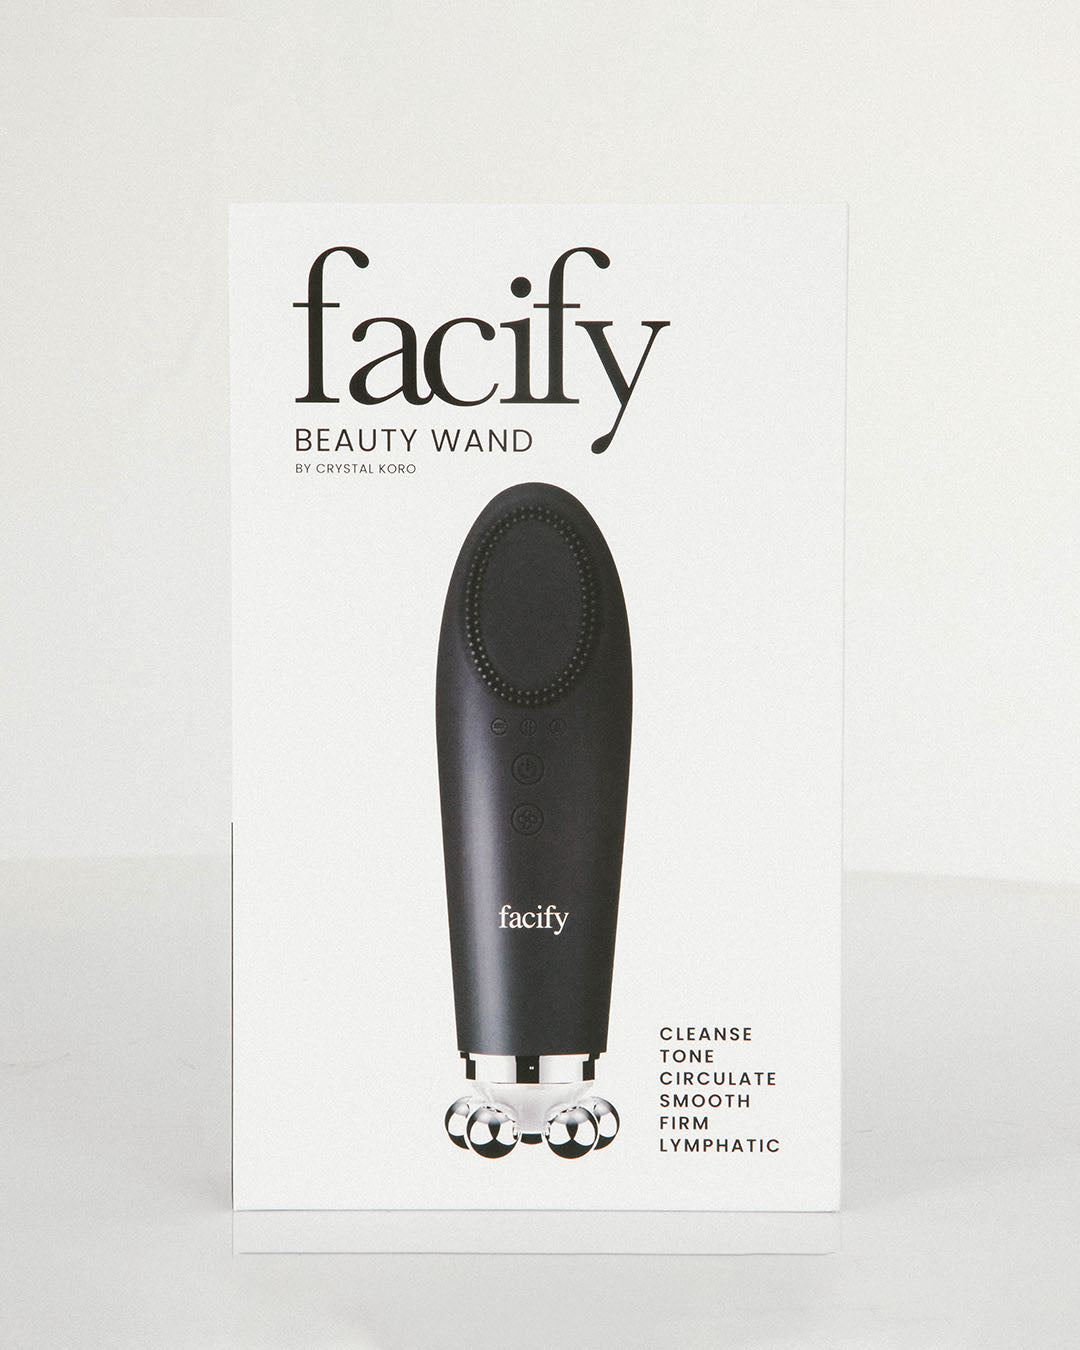 product packaging of the facify beauty wand device box